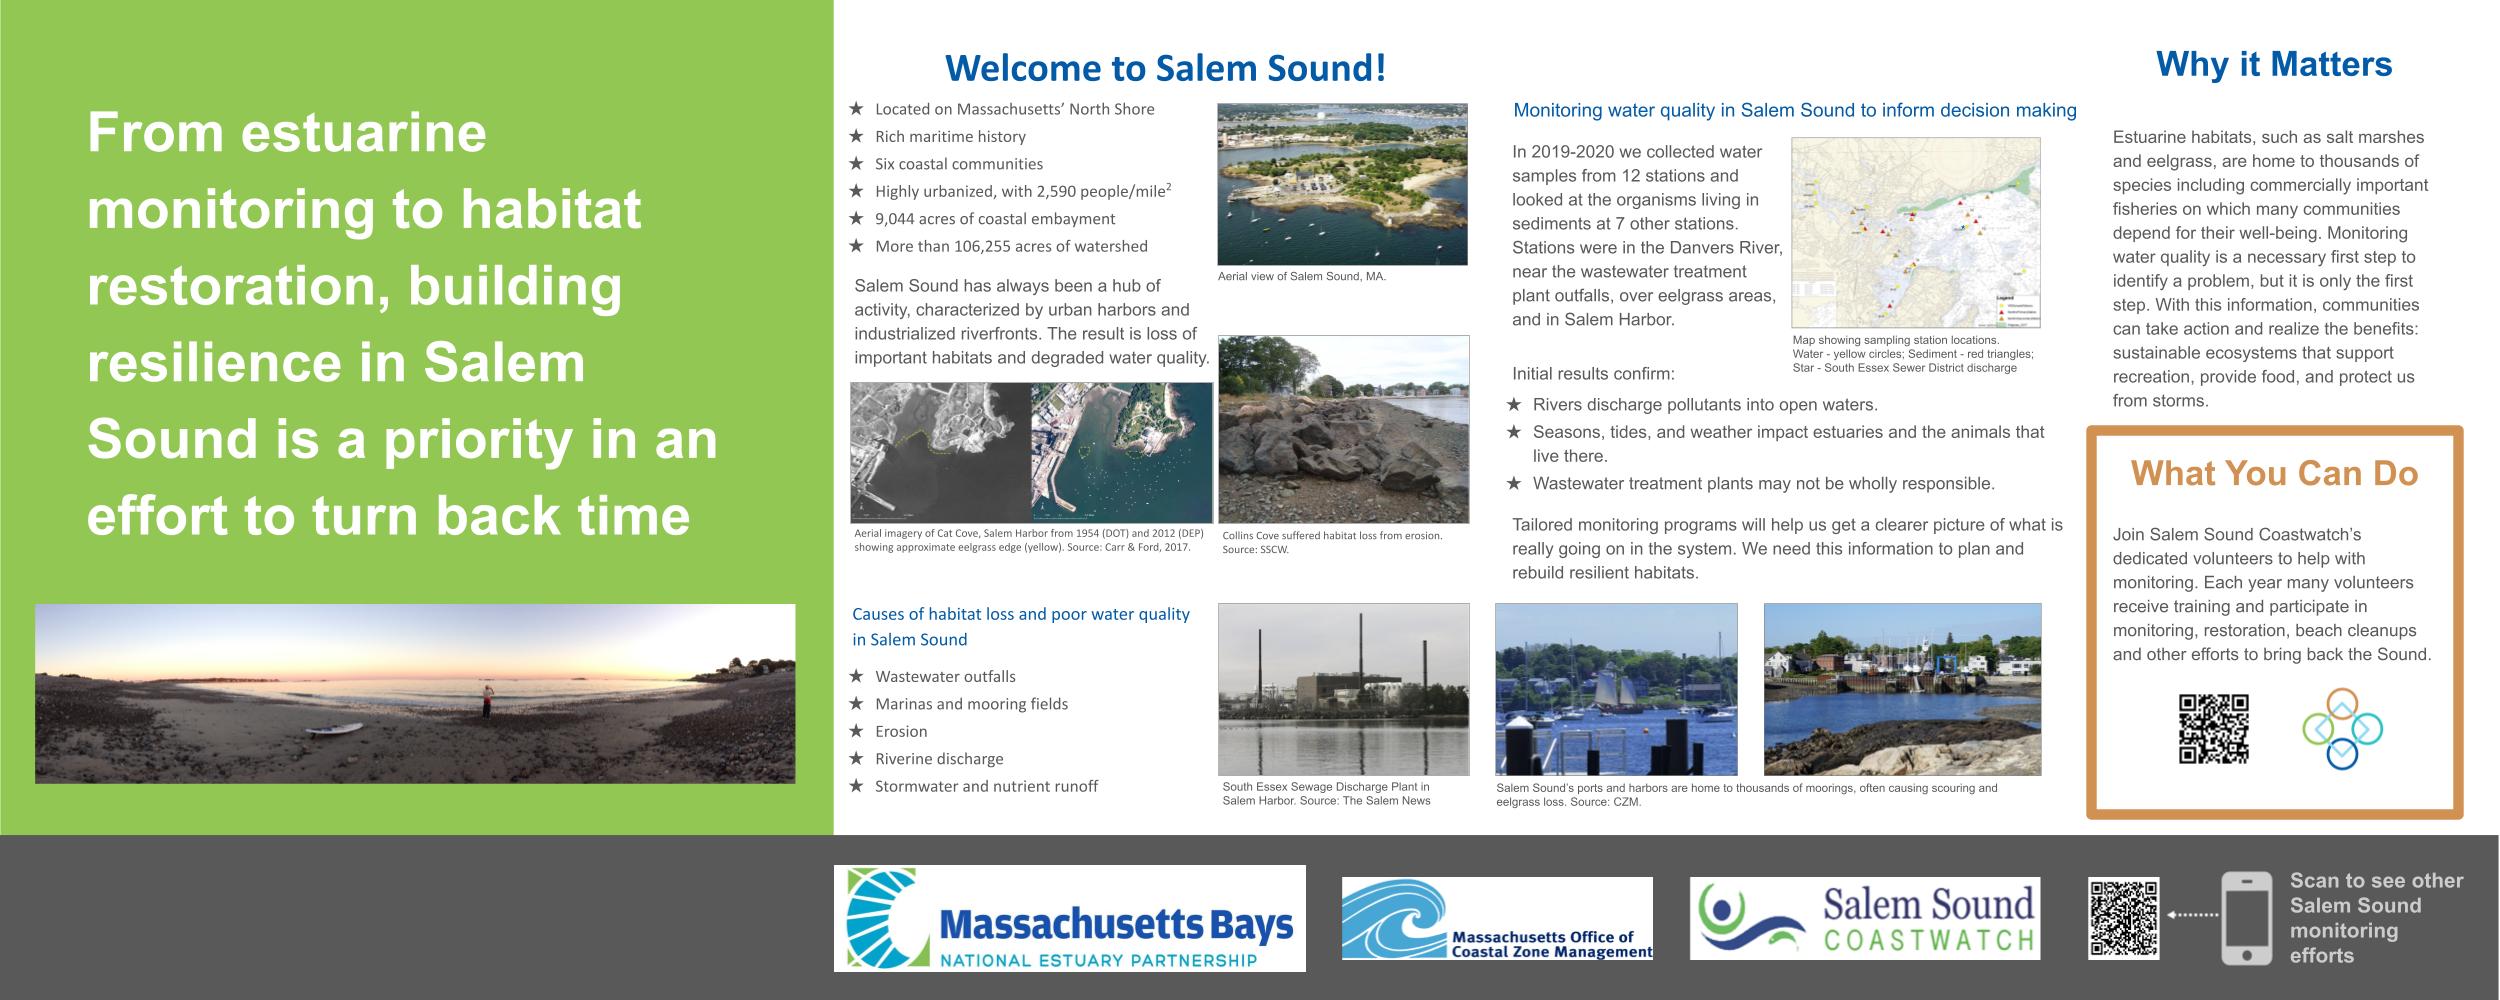 This poster describes the resources and stressors in Salem Sound, and describes work underway to document them.